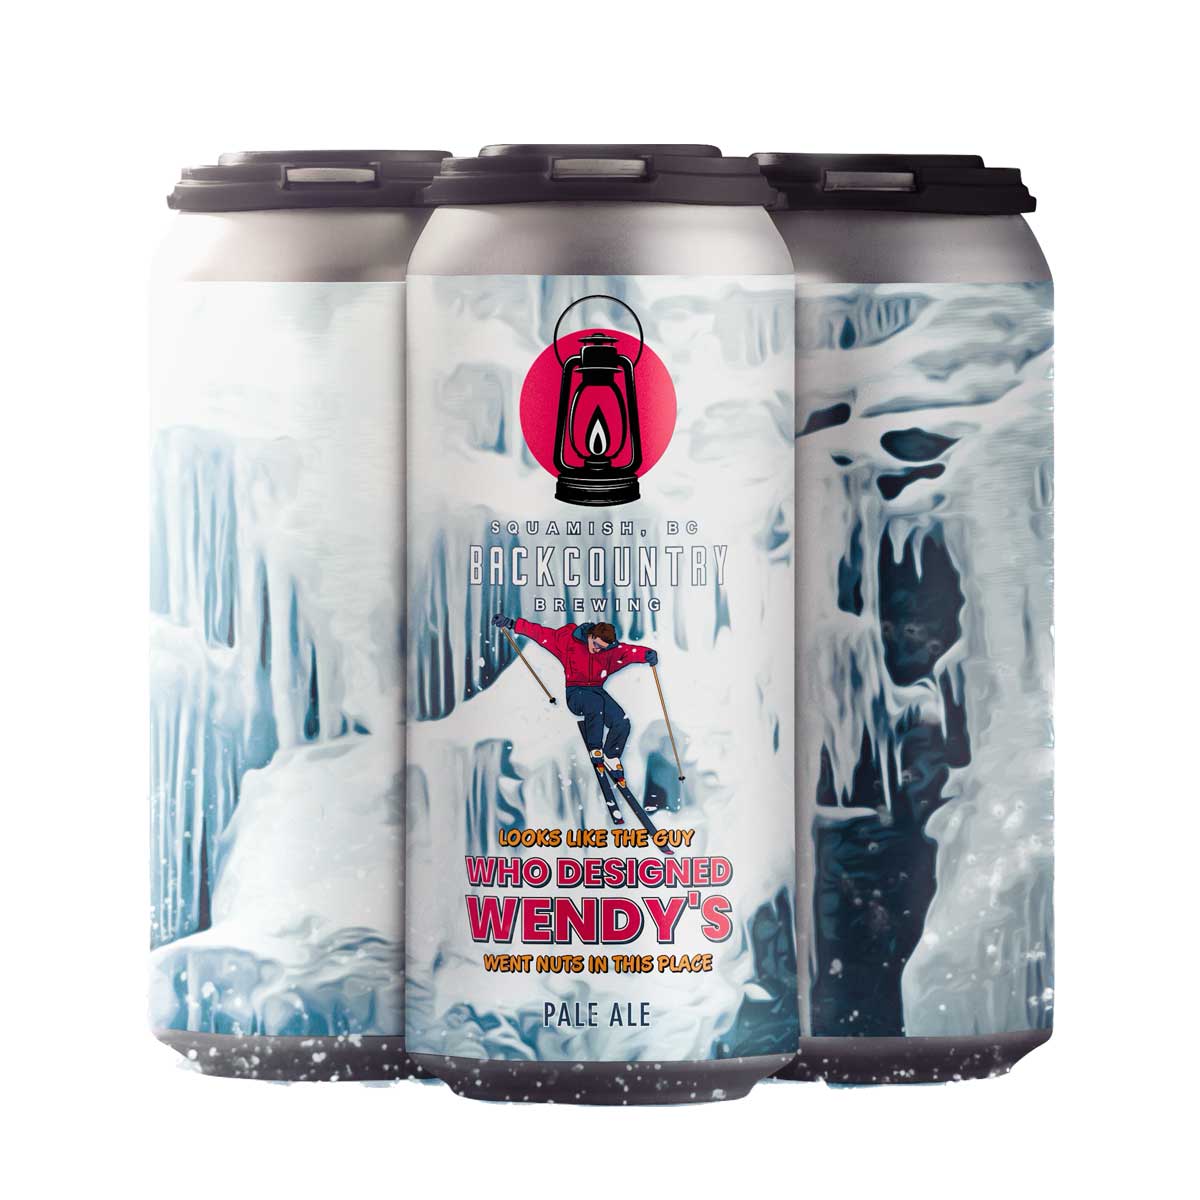 TAG Liquor Stores BC - Backcountry Brewing "Looks like the guy who designed Wendy's went nuts in this place" Pale Ale 4 Pack Cans